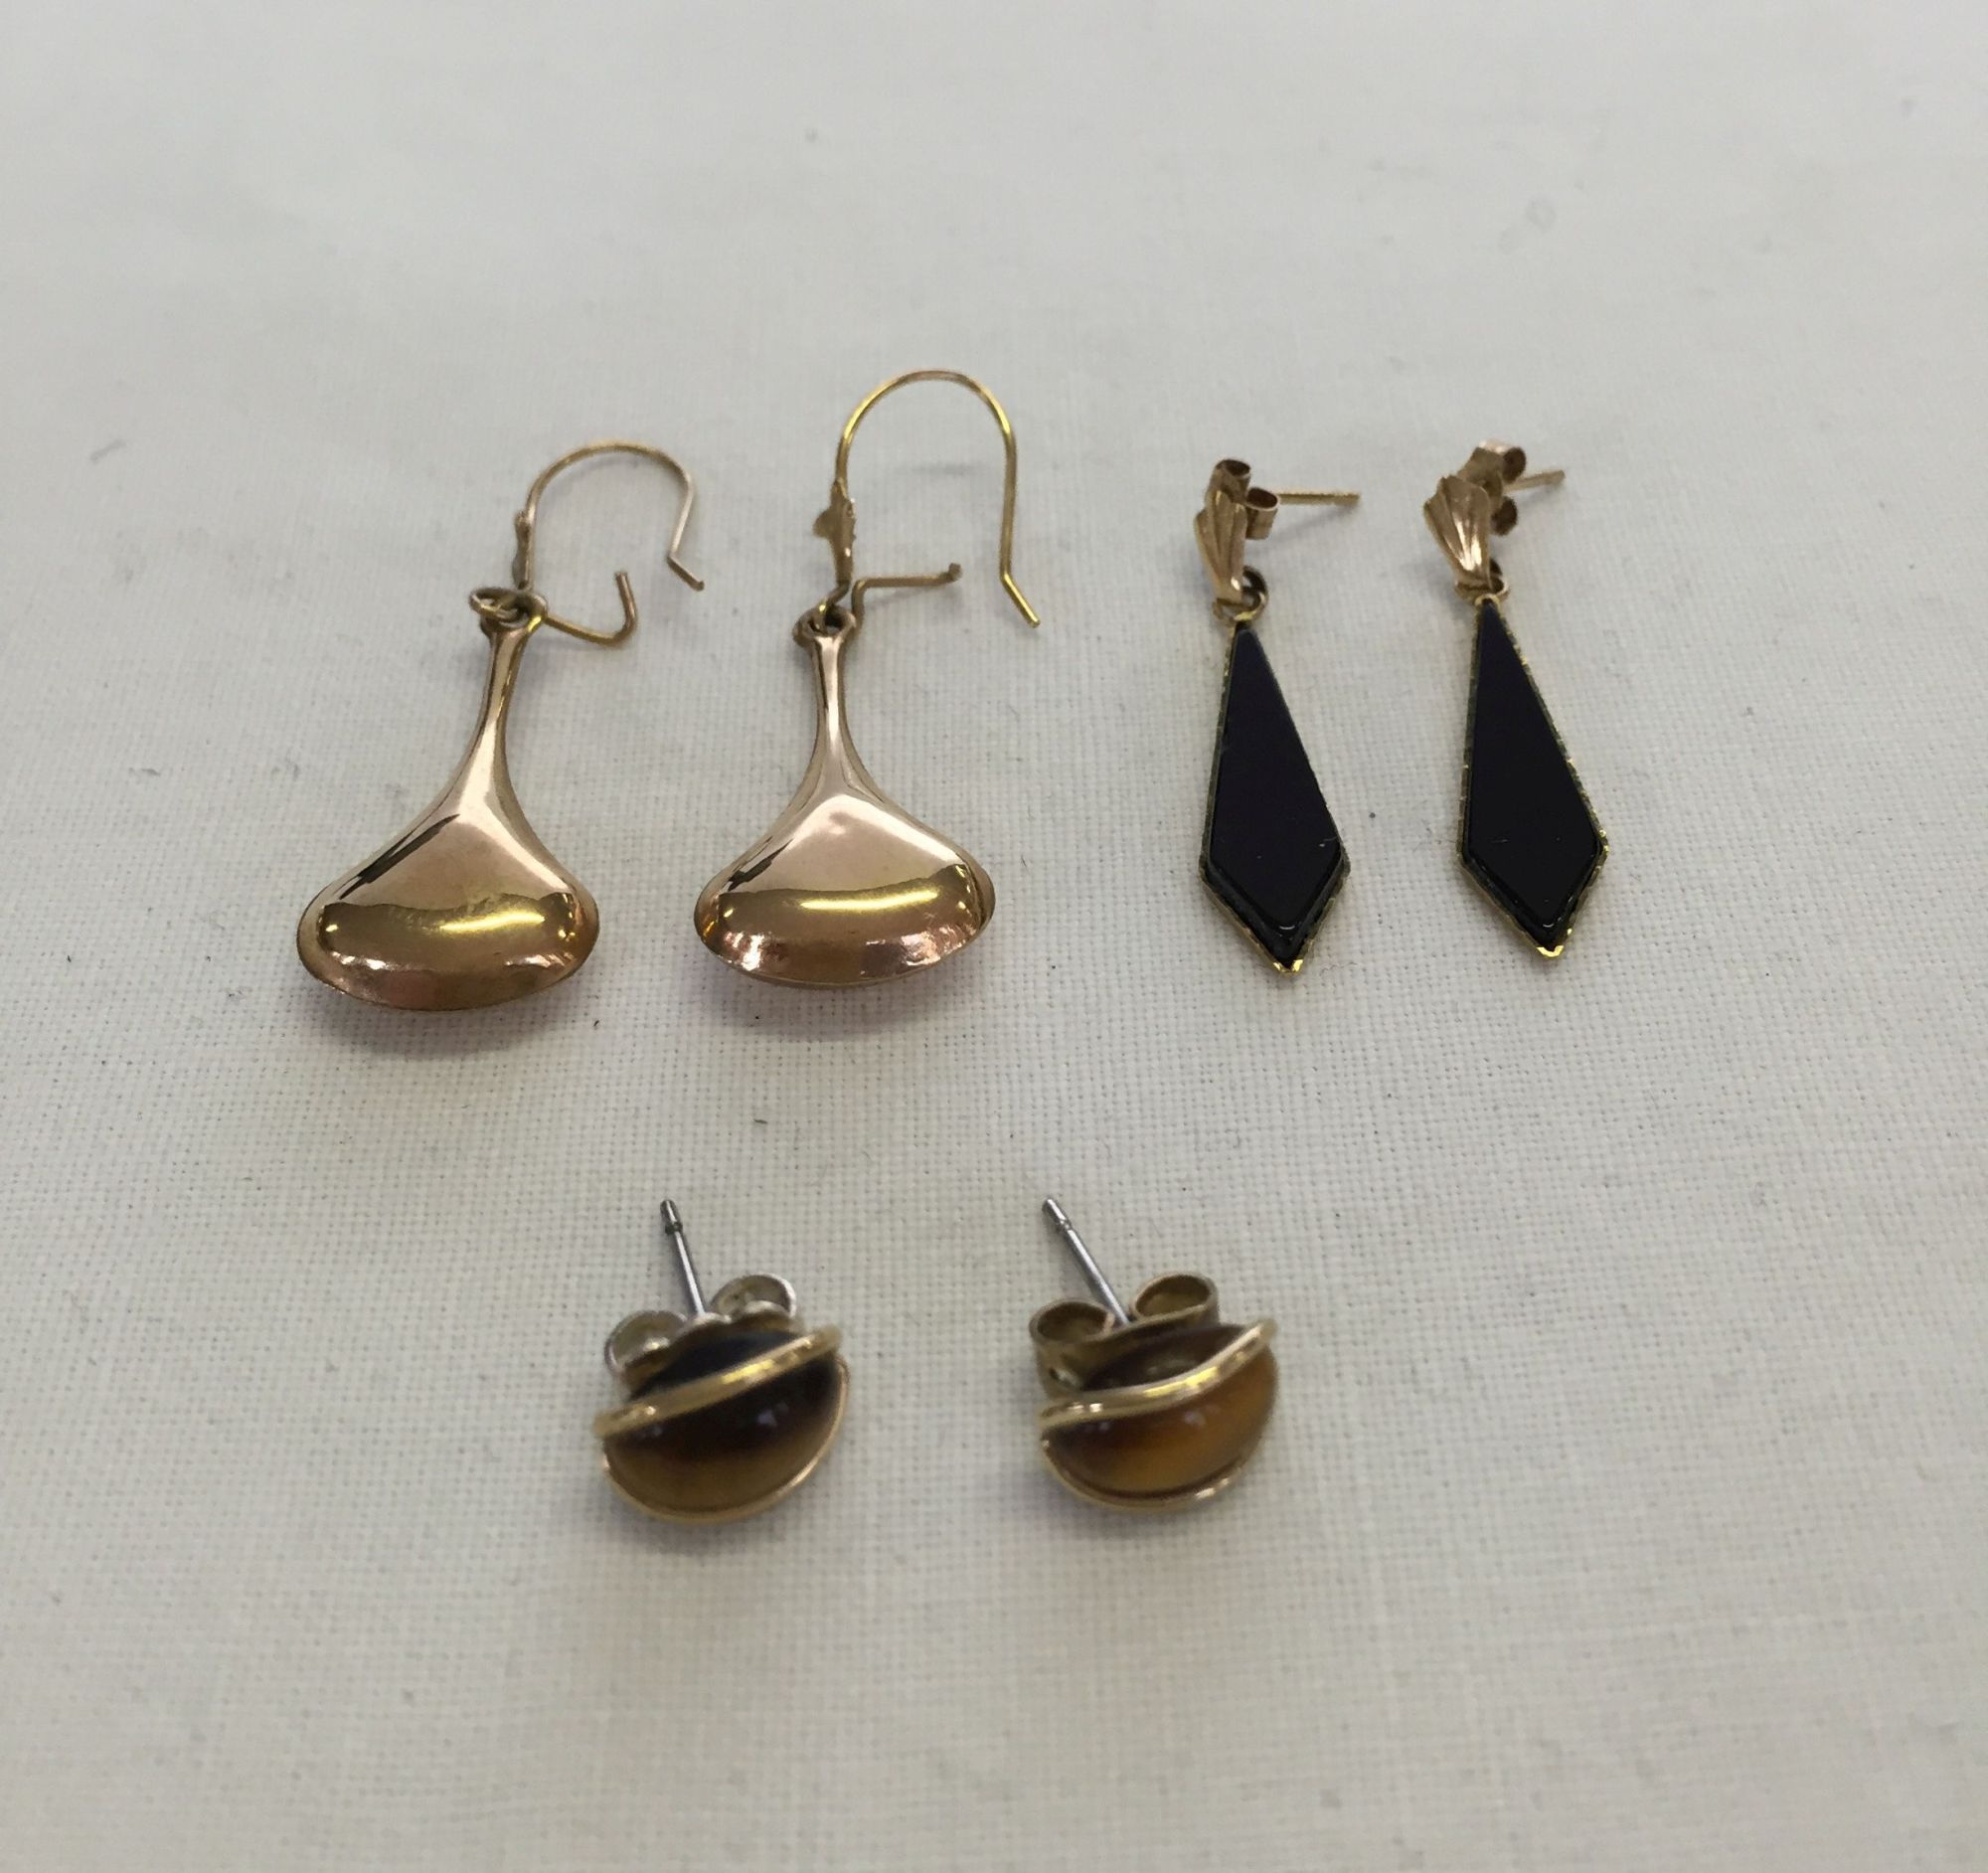 3 pairs of yellow metal earrings. One pair teardrop style, one pair drops set with onyx, and a